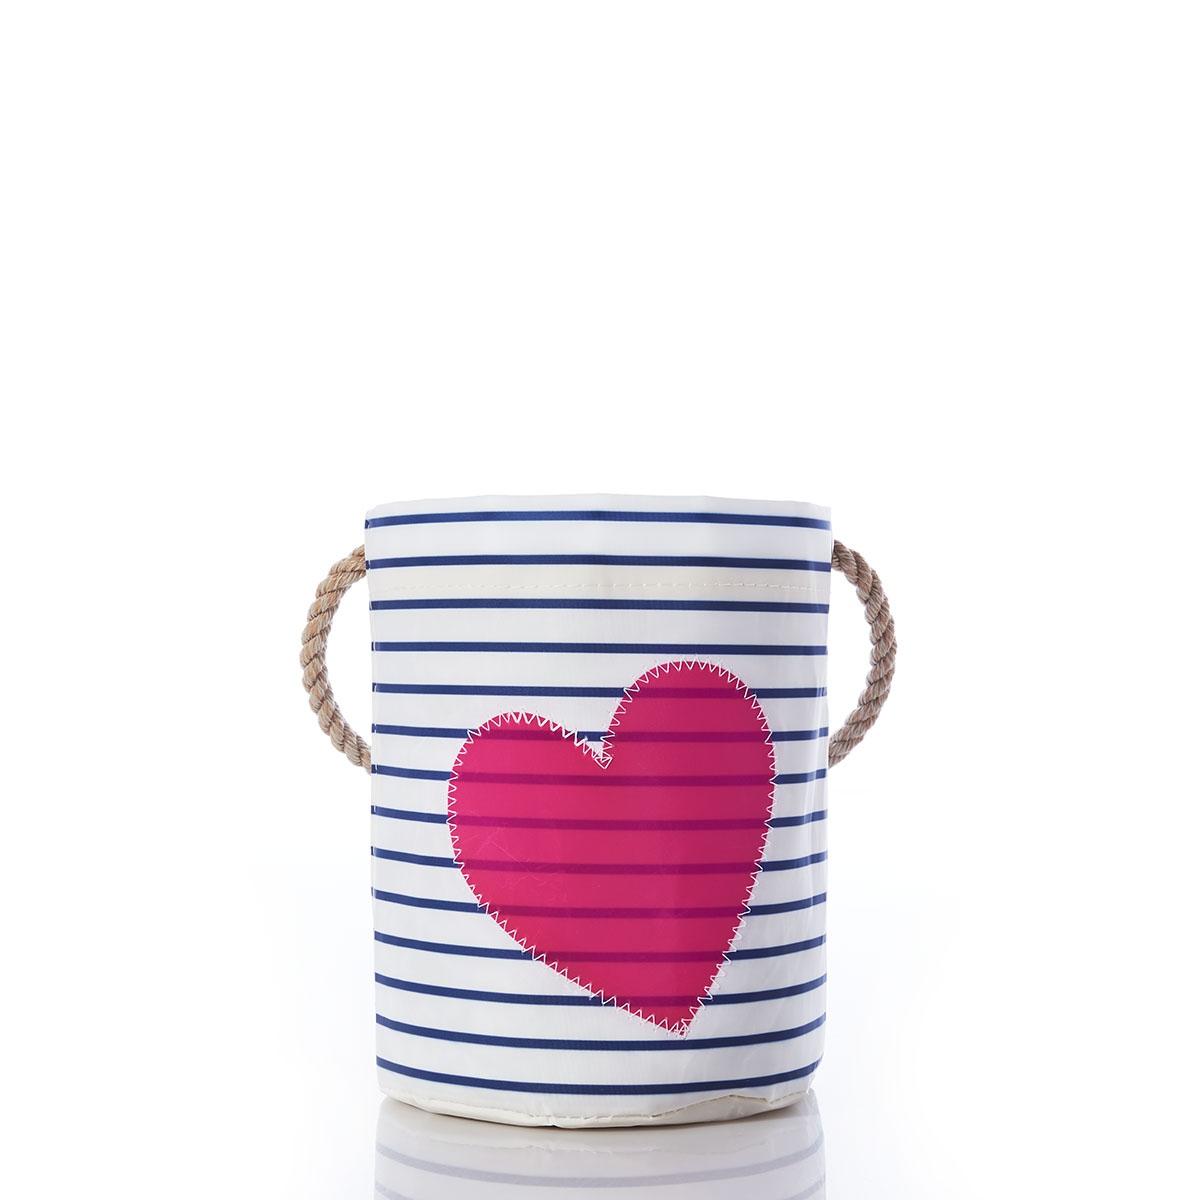 fuchsia heart applique on navy and white striped recycled sail cloth bucket with hemp rope handle